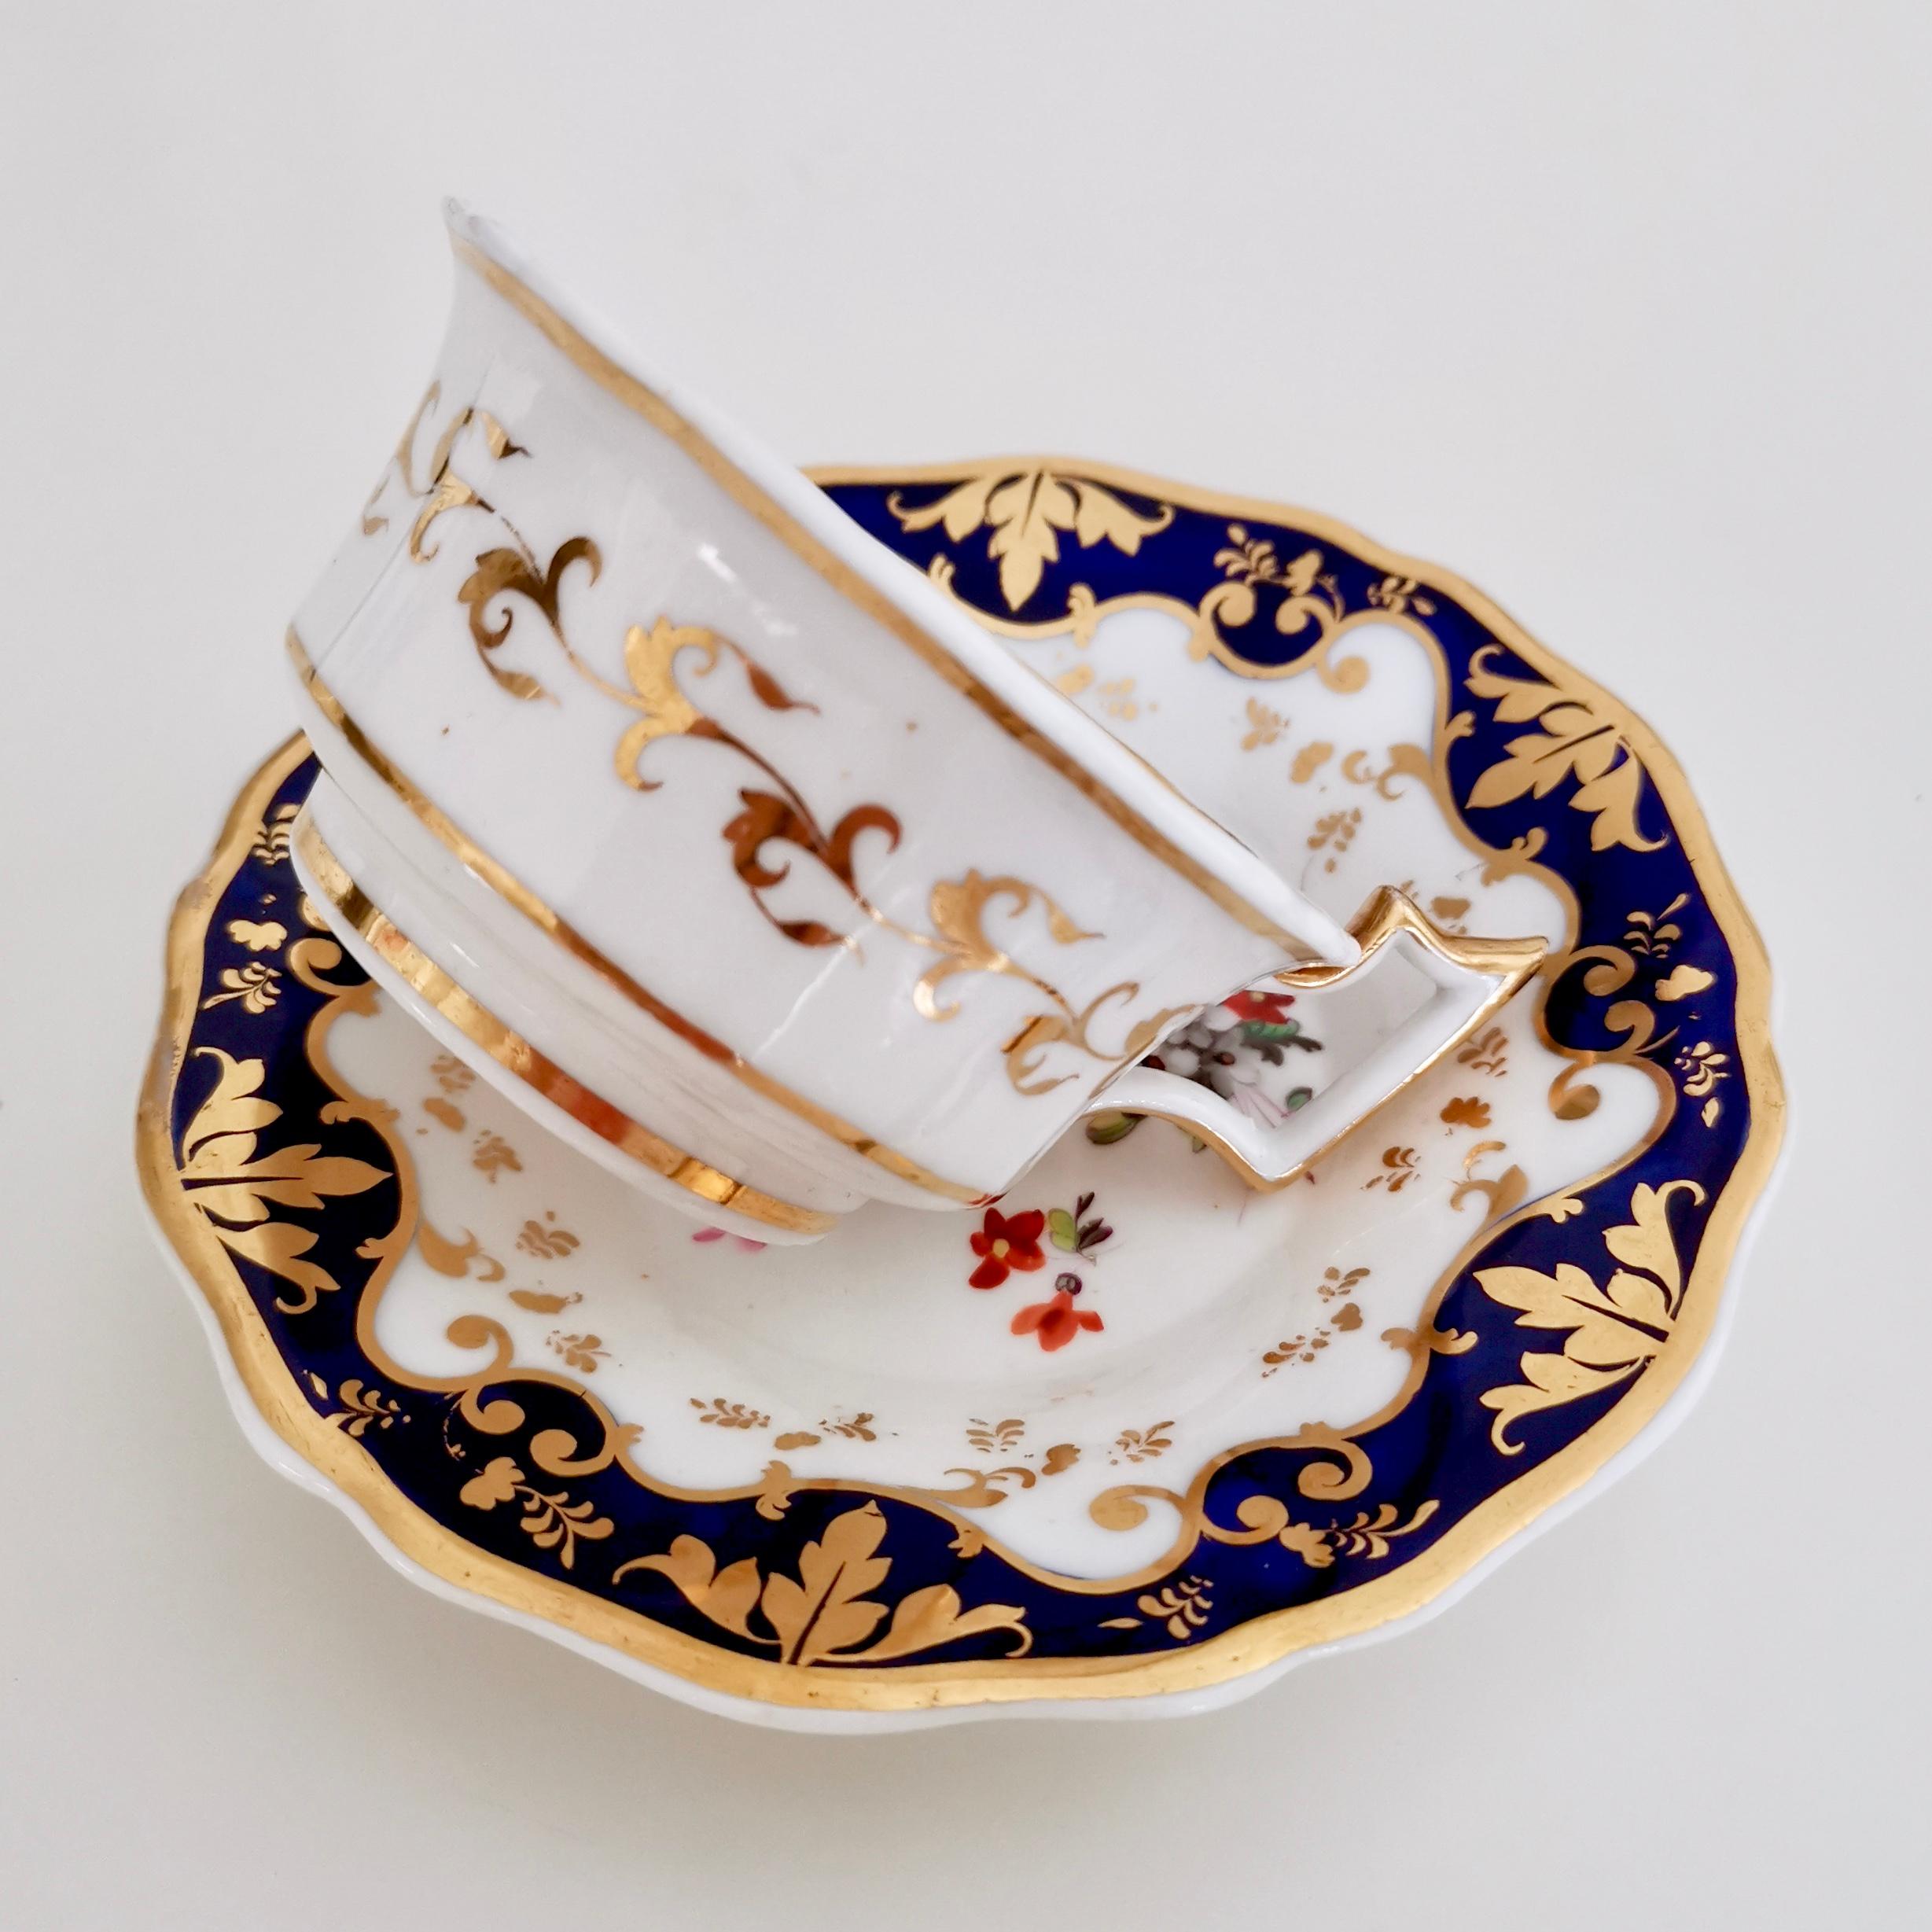 Hand-Painted Porcelain Teacup by Ridgway, Gilt, Cobalt Blue and Flowers, Regency, 1820-1825